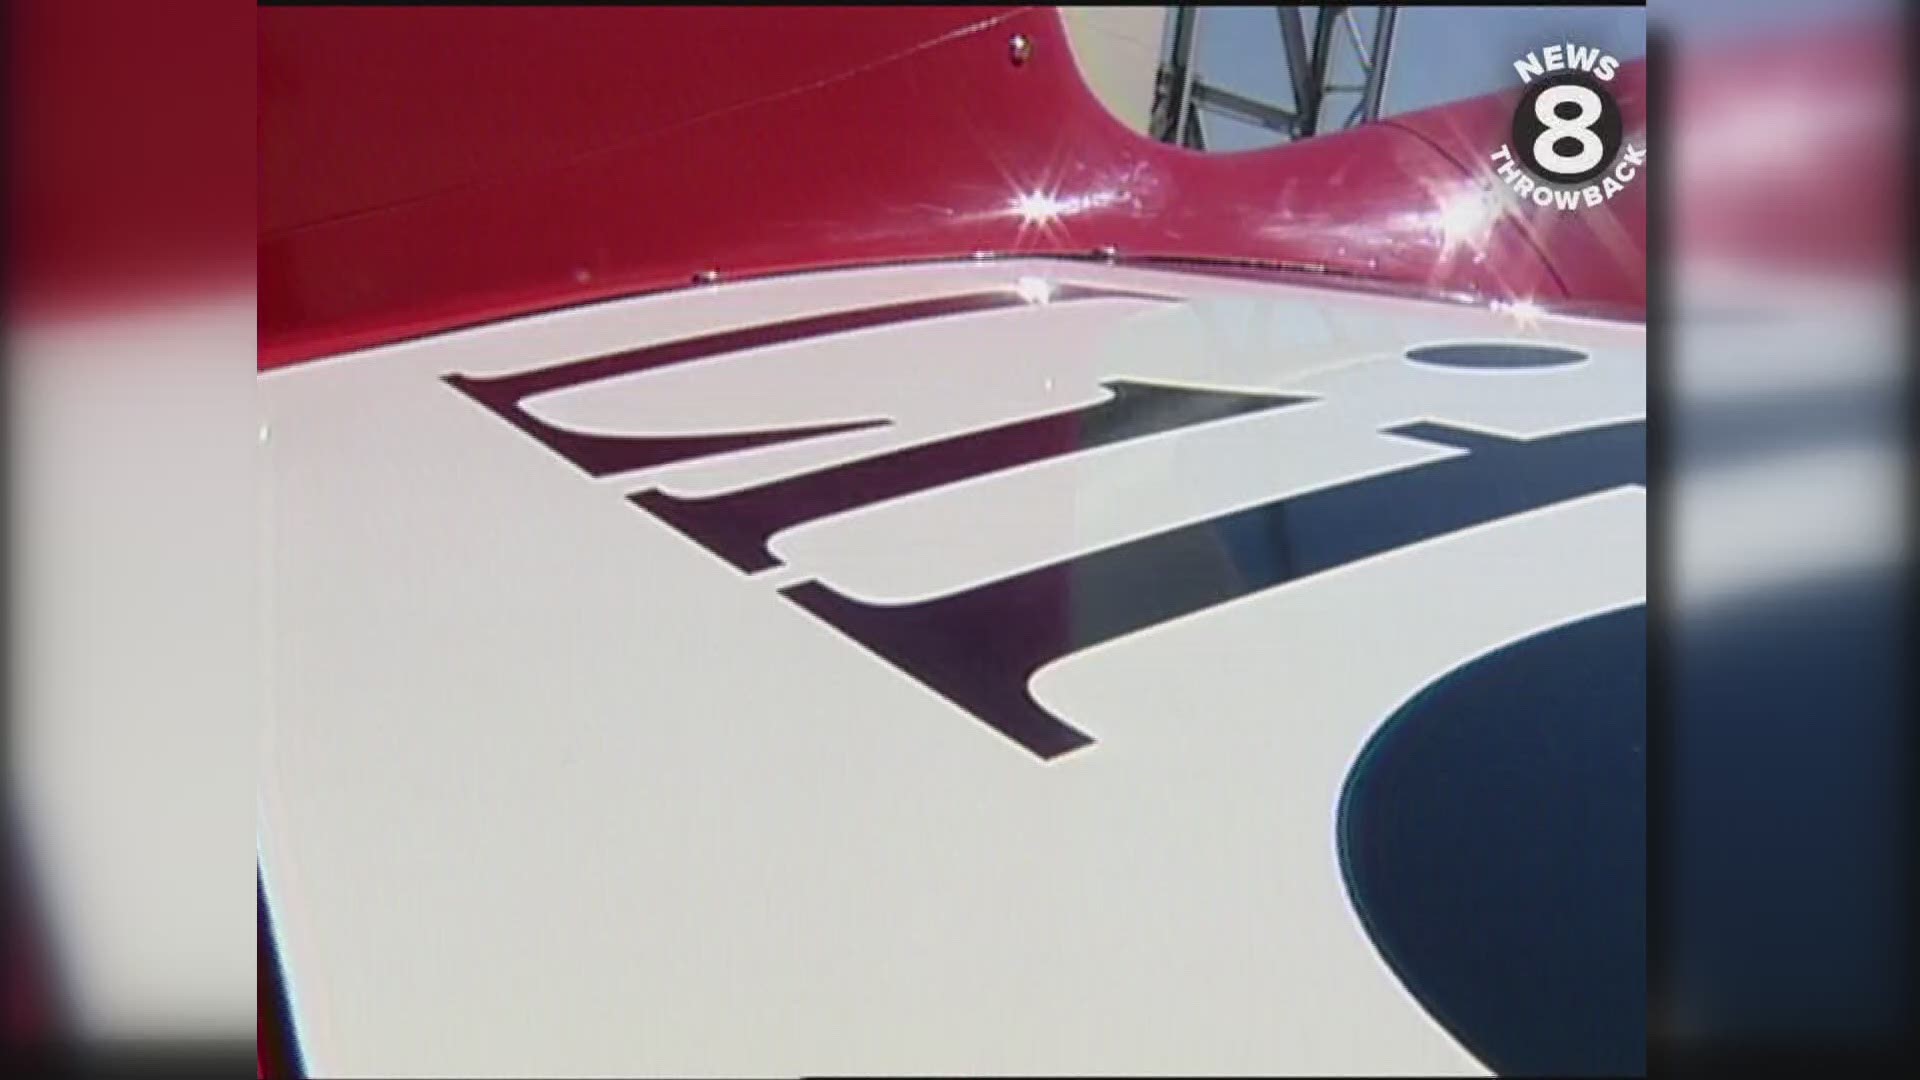 News 8’s Steve Price got a behind-the-scenes look at the Miramar Air Show in 1999 when he boarded an Extra 300 – a German aerobatic plane – with Tim Weber.